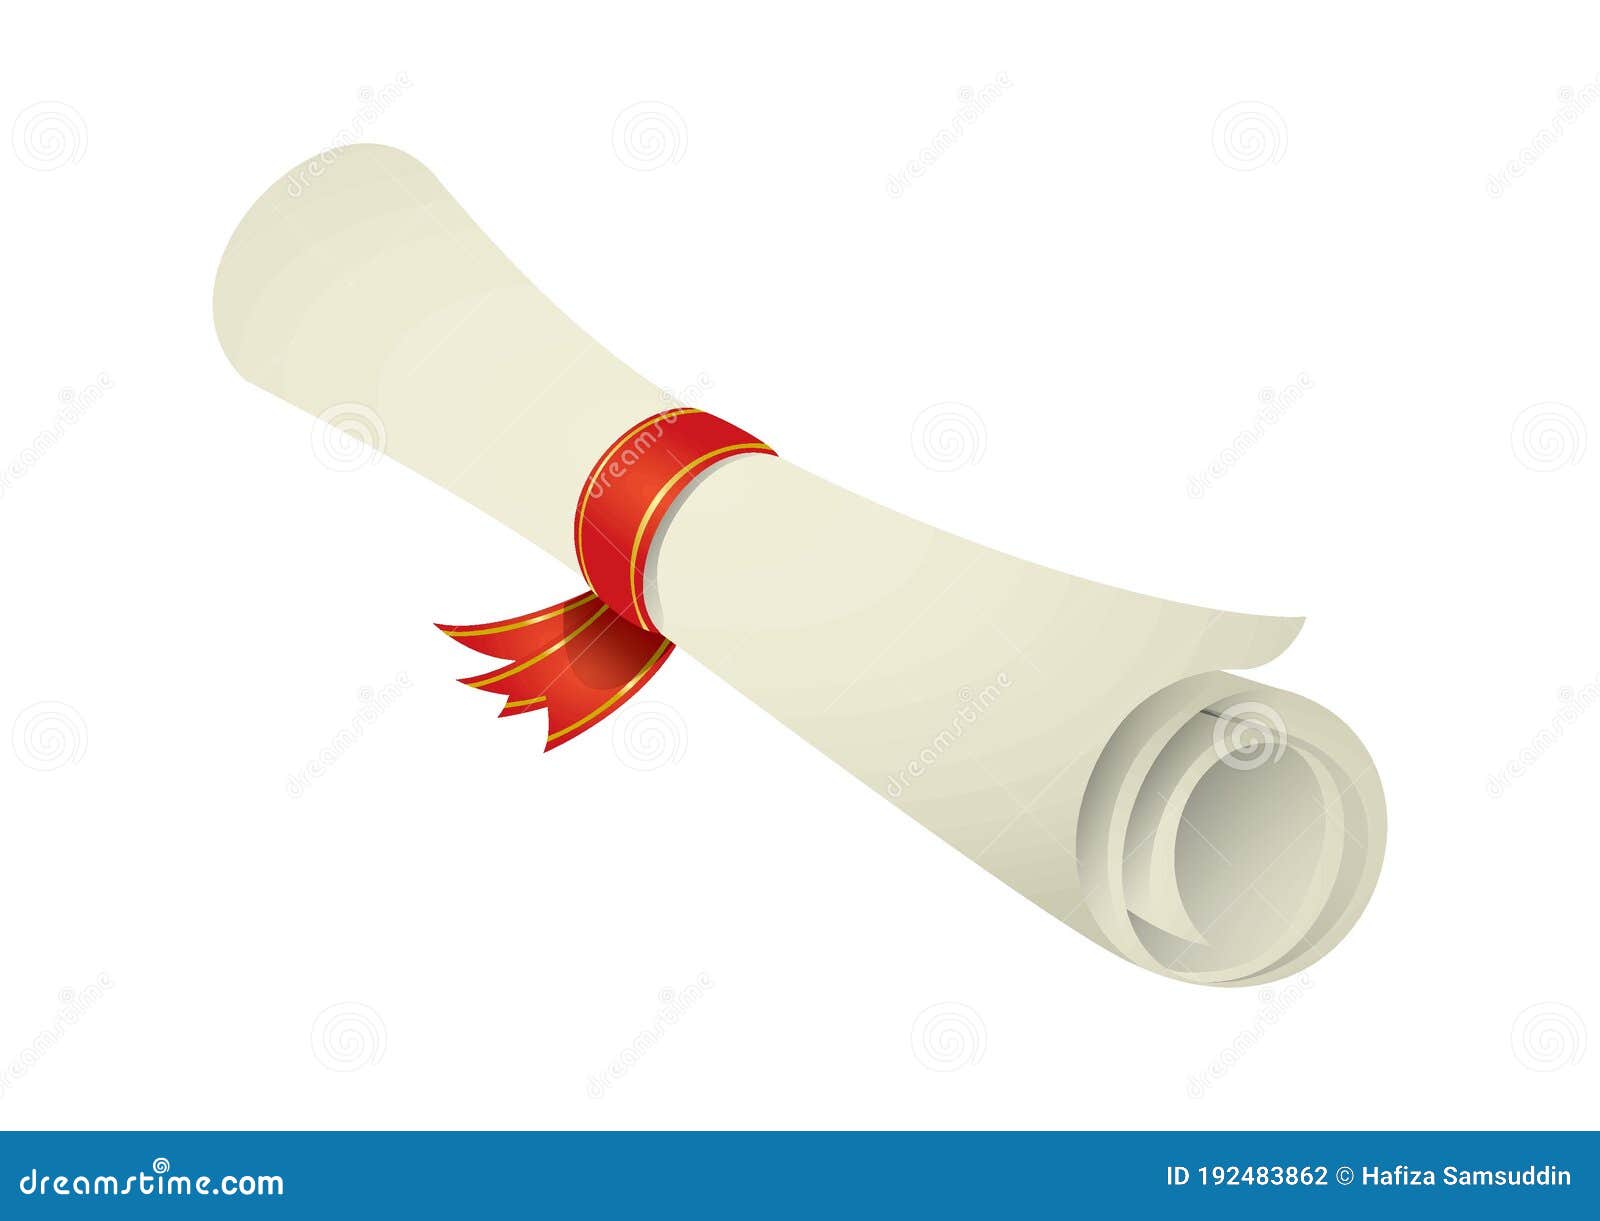 graduation-cap-and-scroll-with-magnifying-glass-royalty-free-stock